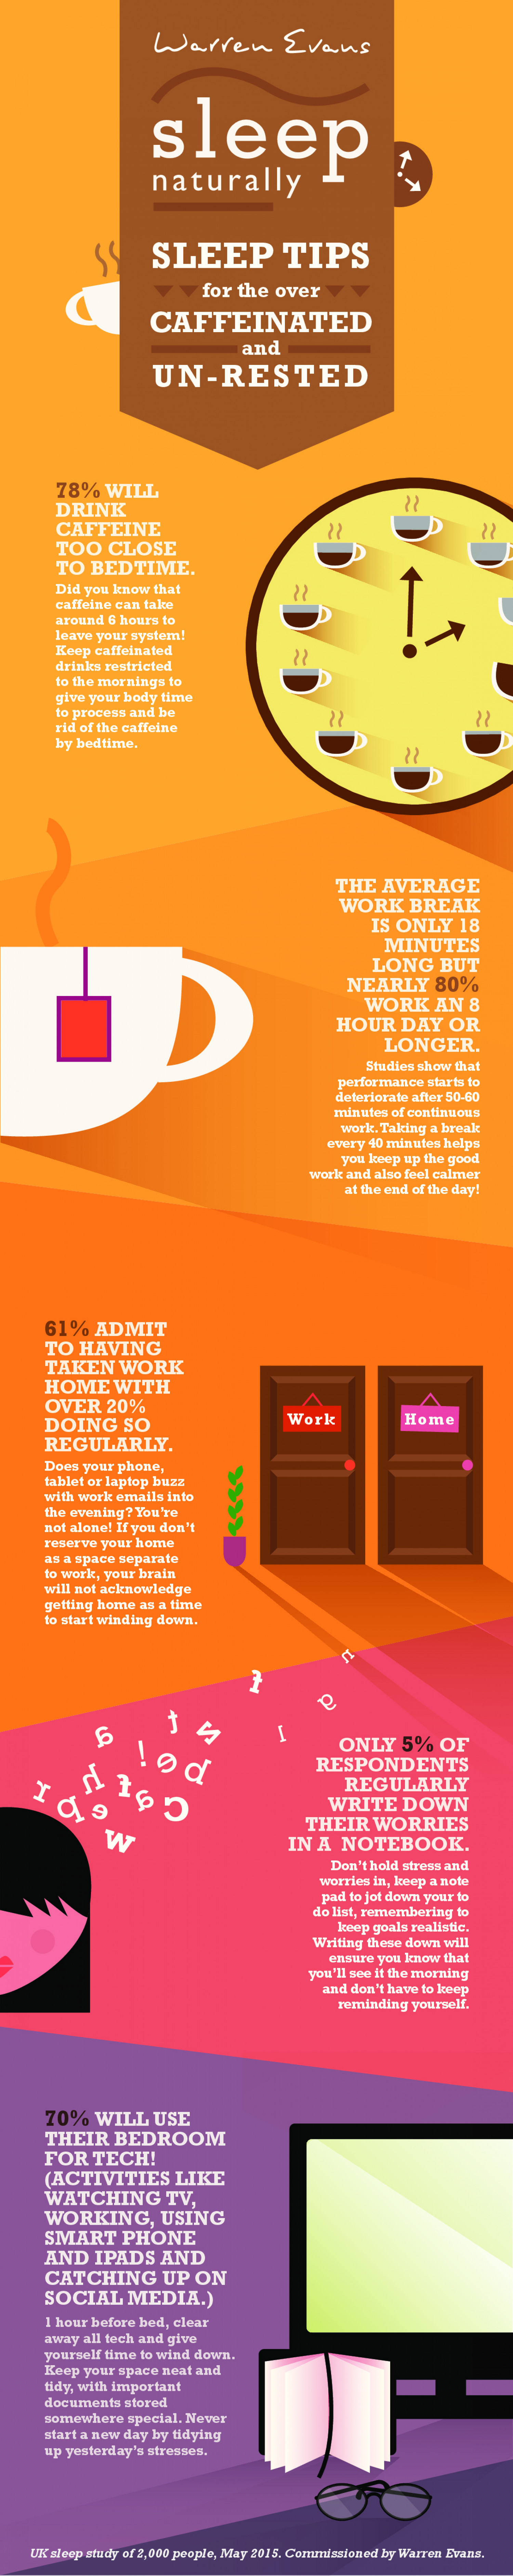 Sleep Tips for the Over Caffeinated and Unrested from Warren Evans Infographic